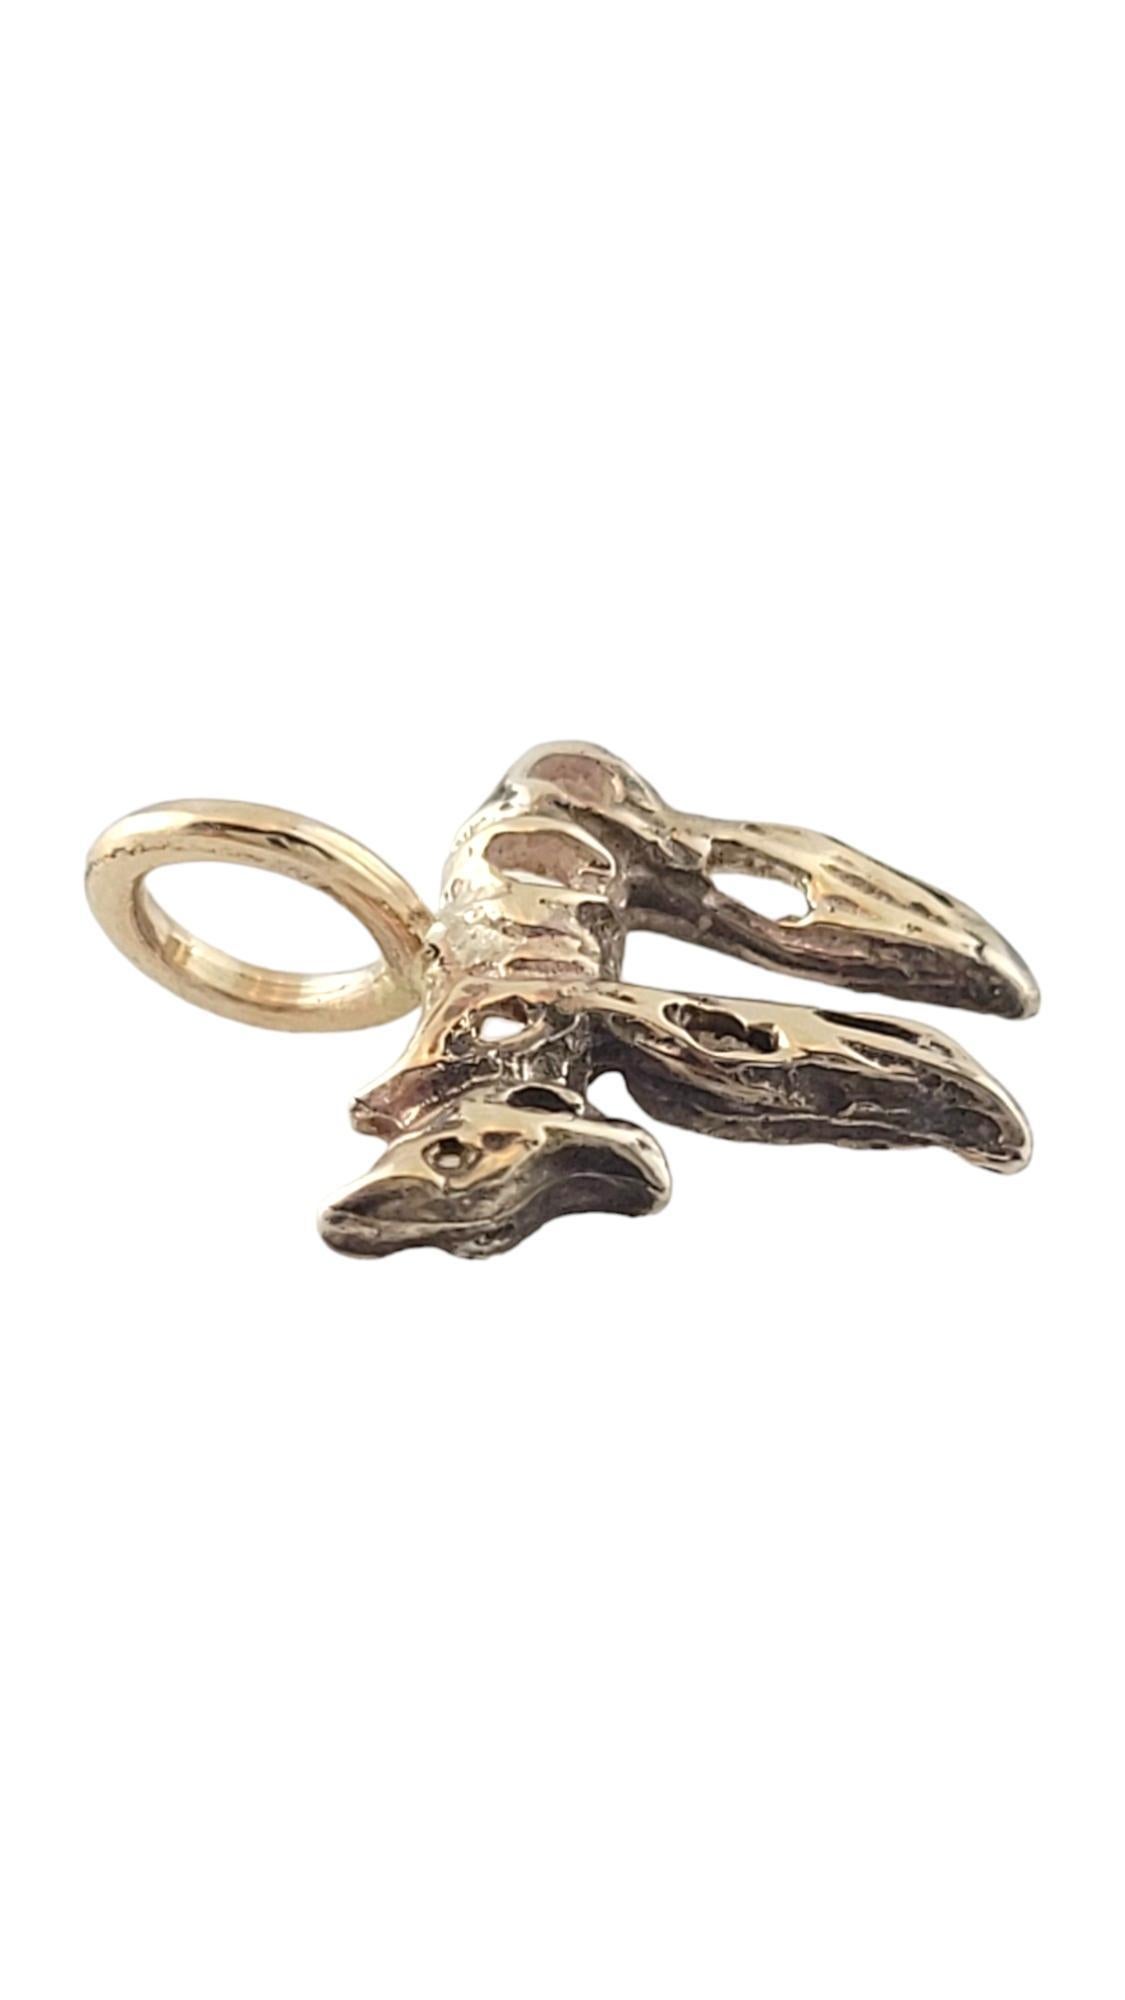 Vintage 10K Yellow Gold Chai Charm

This gorgeous 10K gold chai charm would look beautiful on a chain!

Size: 15.85mm X 11.40mm X 2.00mm

Weight: 0.4 dwt/ 0.7 g

Tested 10K

Very good condition, professionally polished.

Will come packaged in a gift